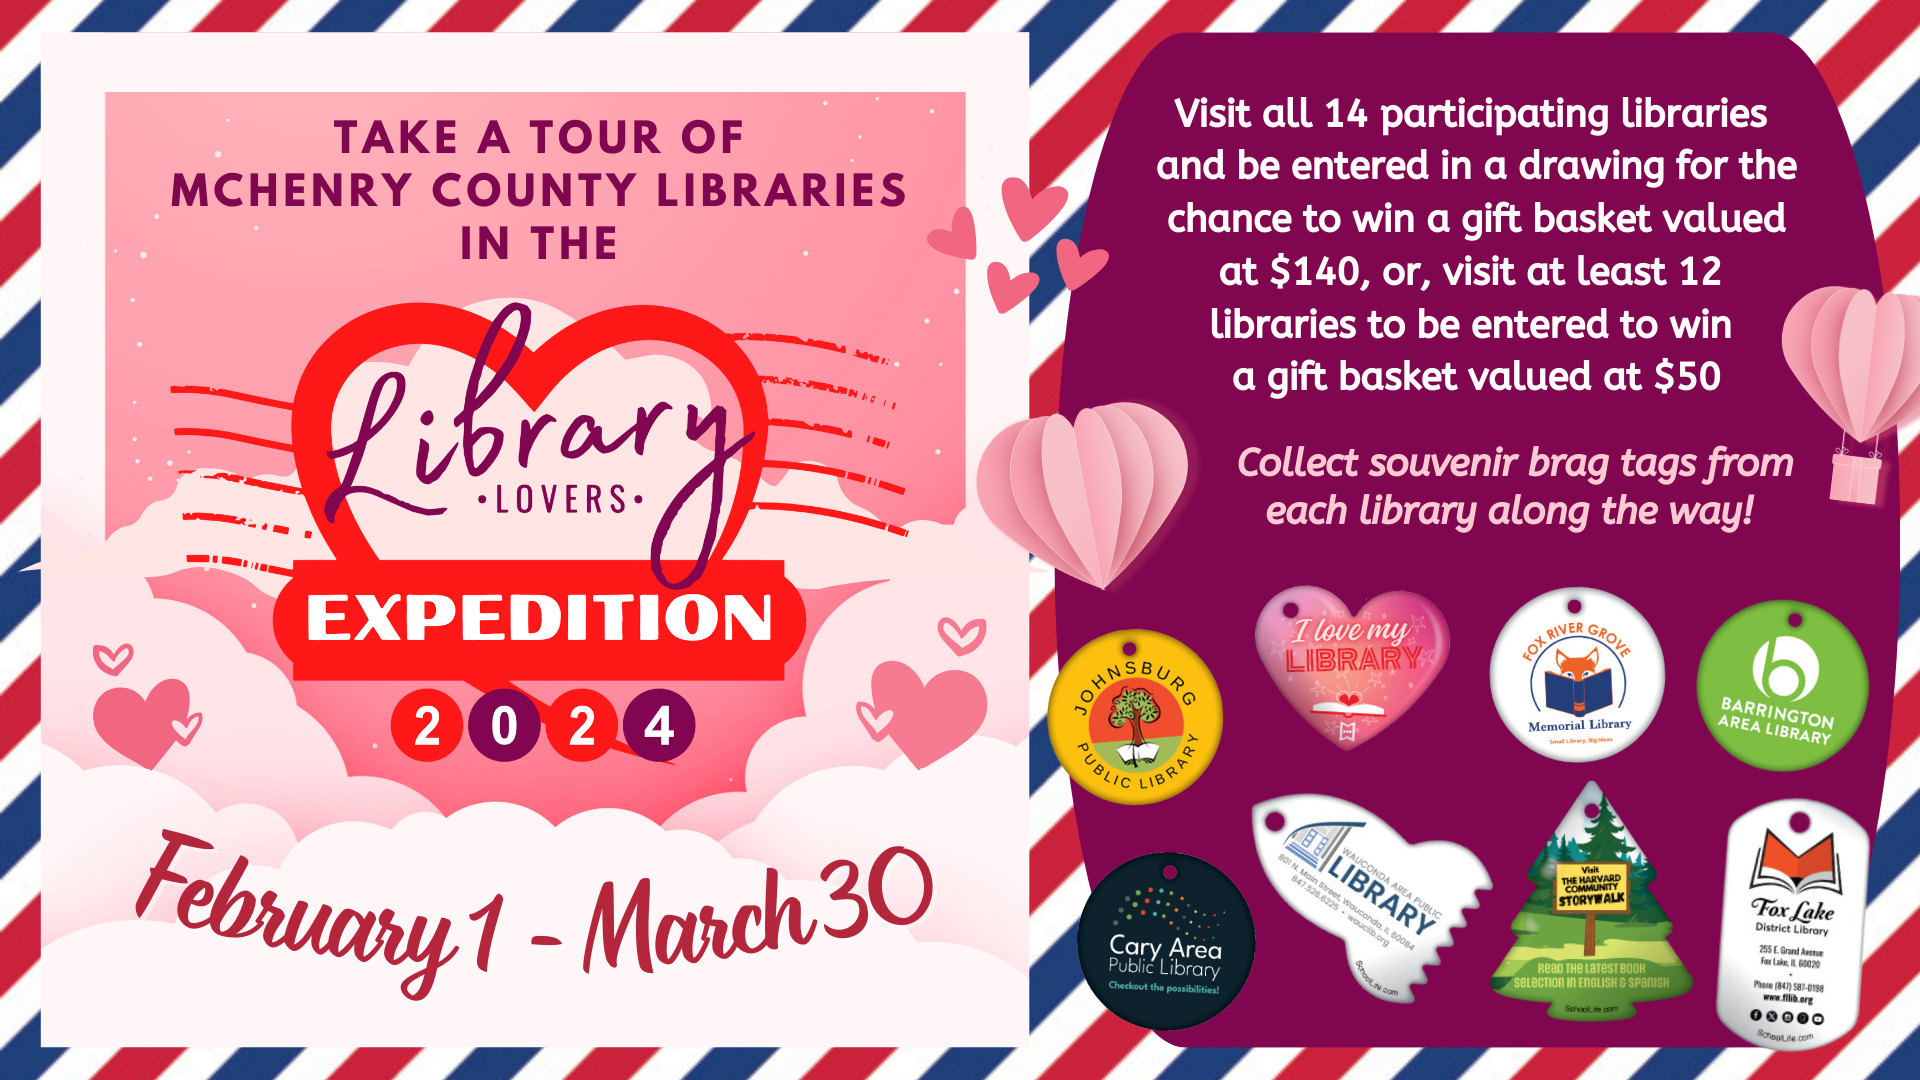 McHenry County Library Lovers Expedition logo and information